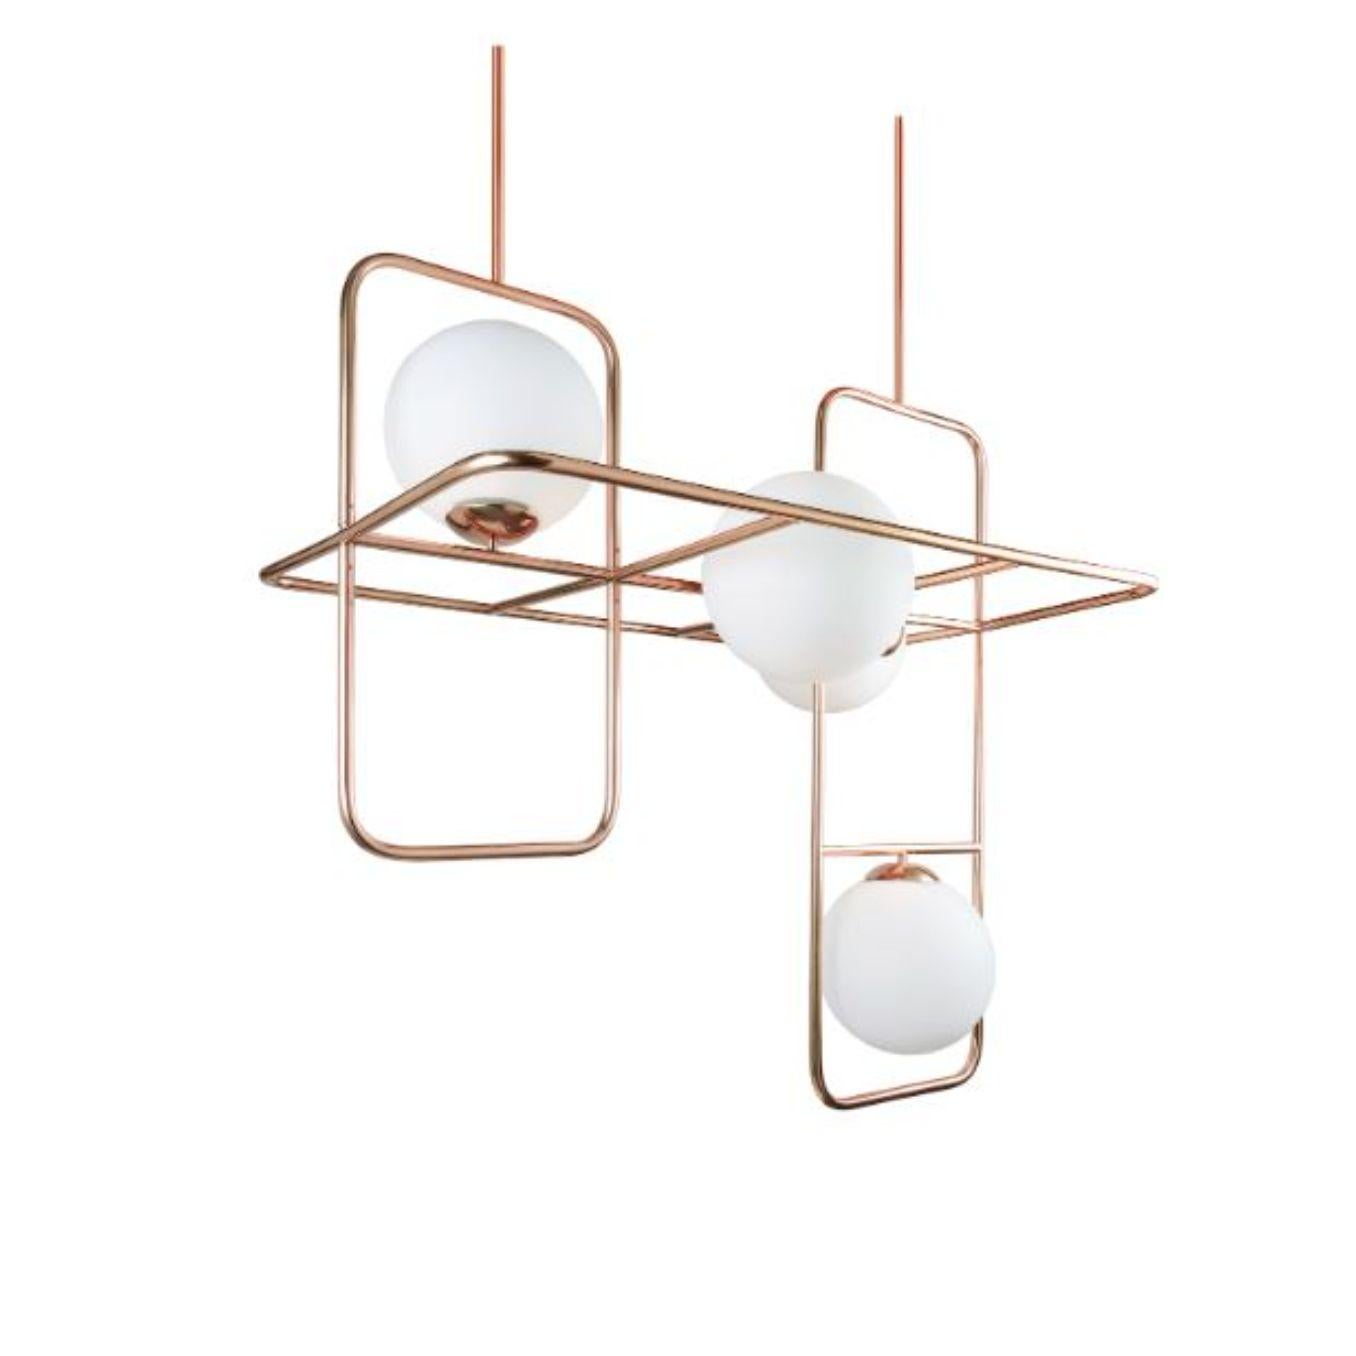 Copper Link Suspension lamp by Dooq
Dimensions: W 100 x D 64 x H 100 cm
Materials: lacquered metal, polished or brushed metal, copper.
Also available in different colors and materials. 

Information:
230V/50Hz
4 x max. G9
5W LED

120V/60Hz
4 x max.